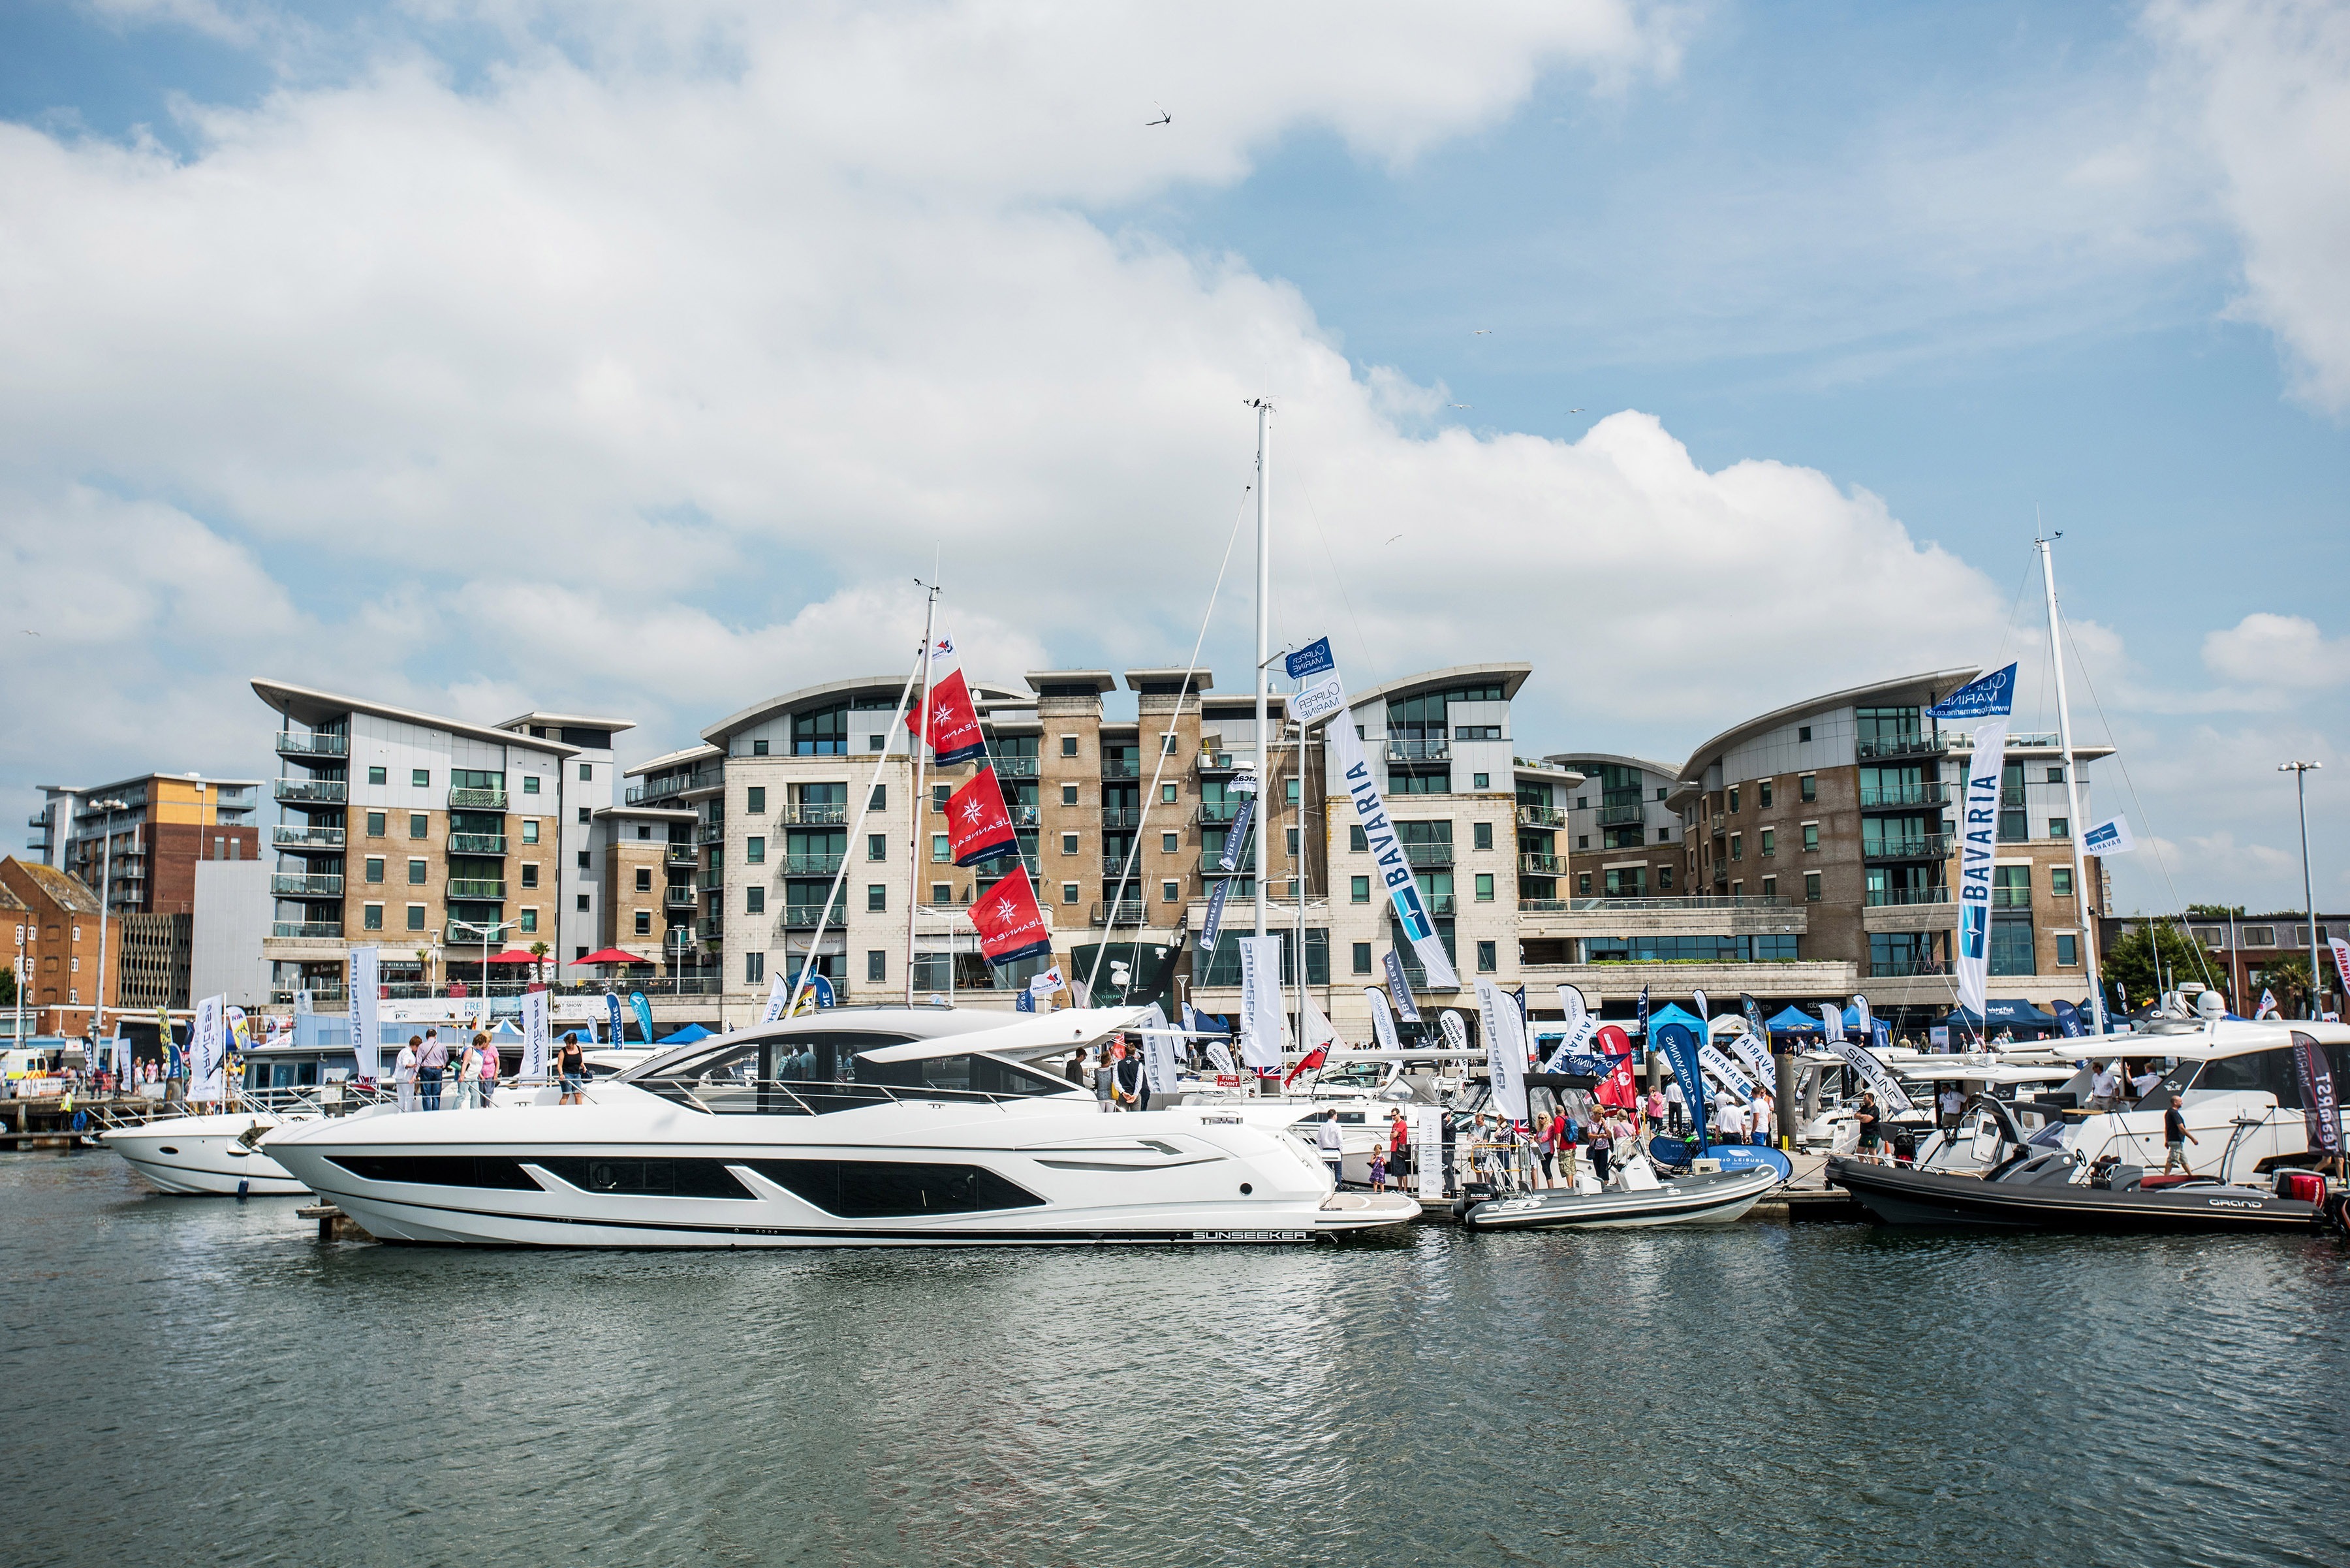 ﻿Sunseeker announced as returning headline sponsor for the 2019 Poole Harbour Boat Show